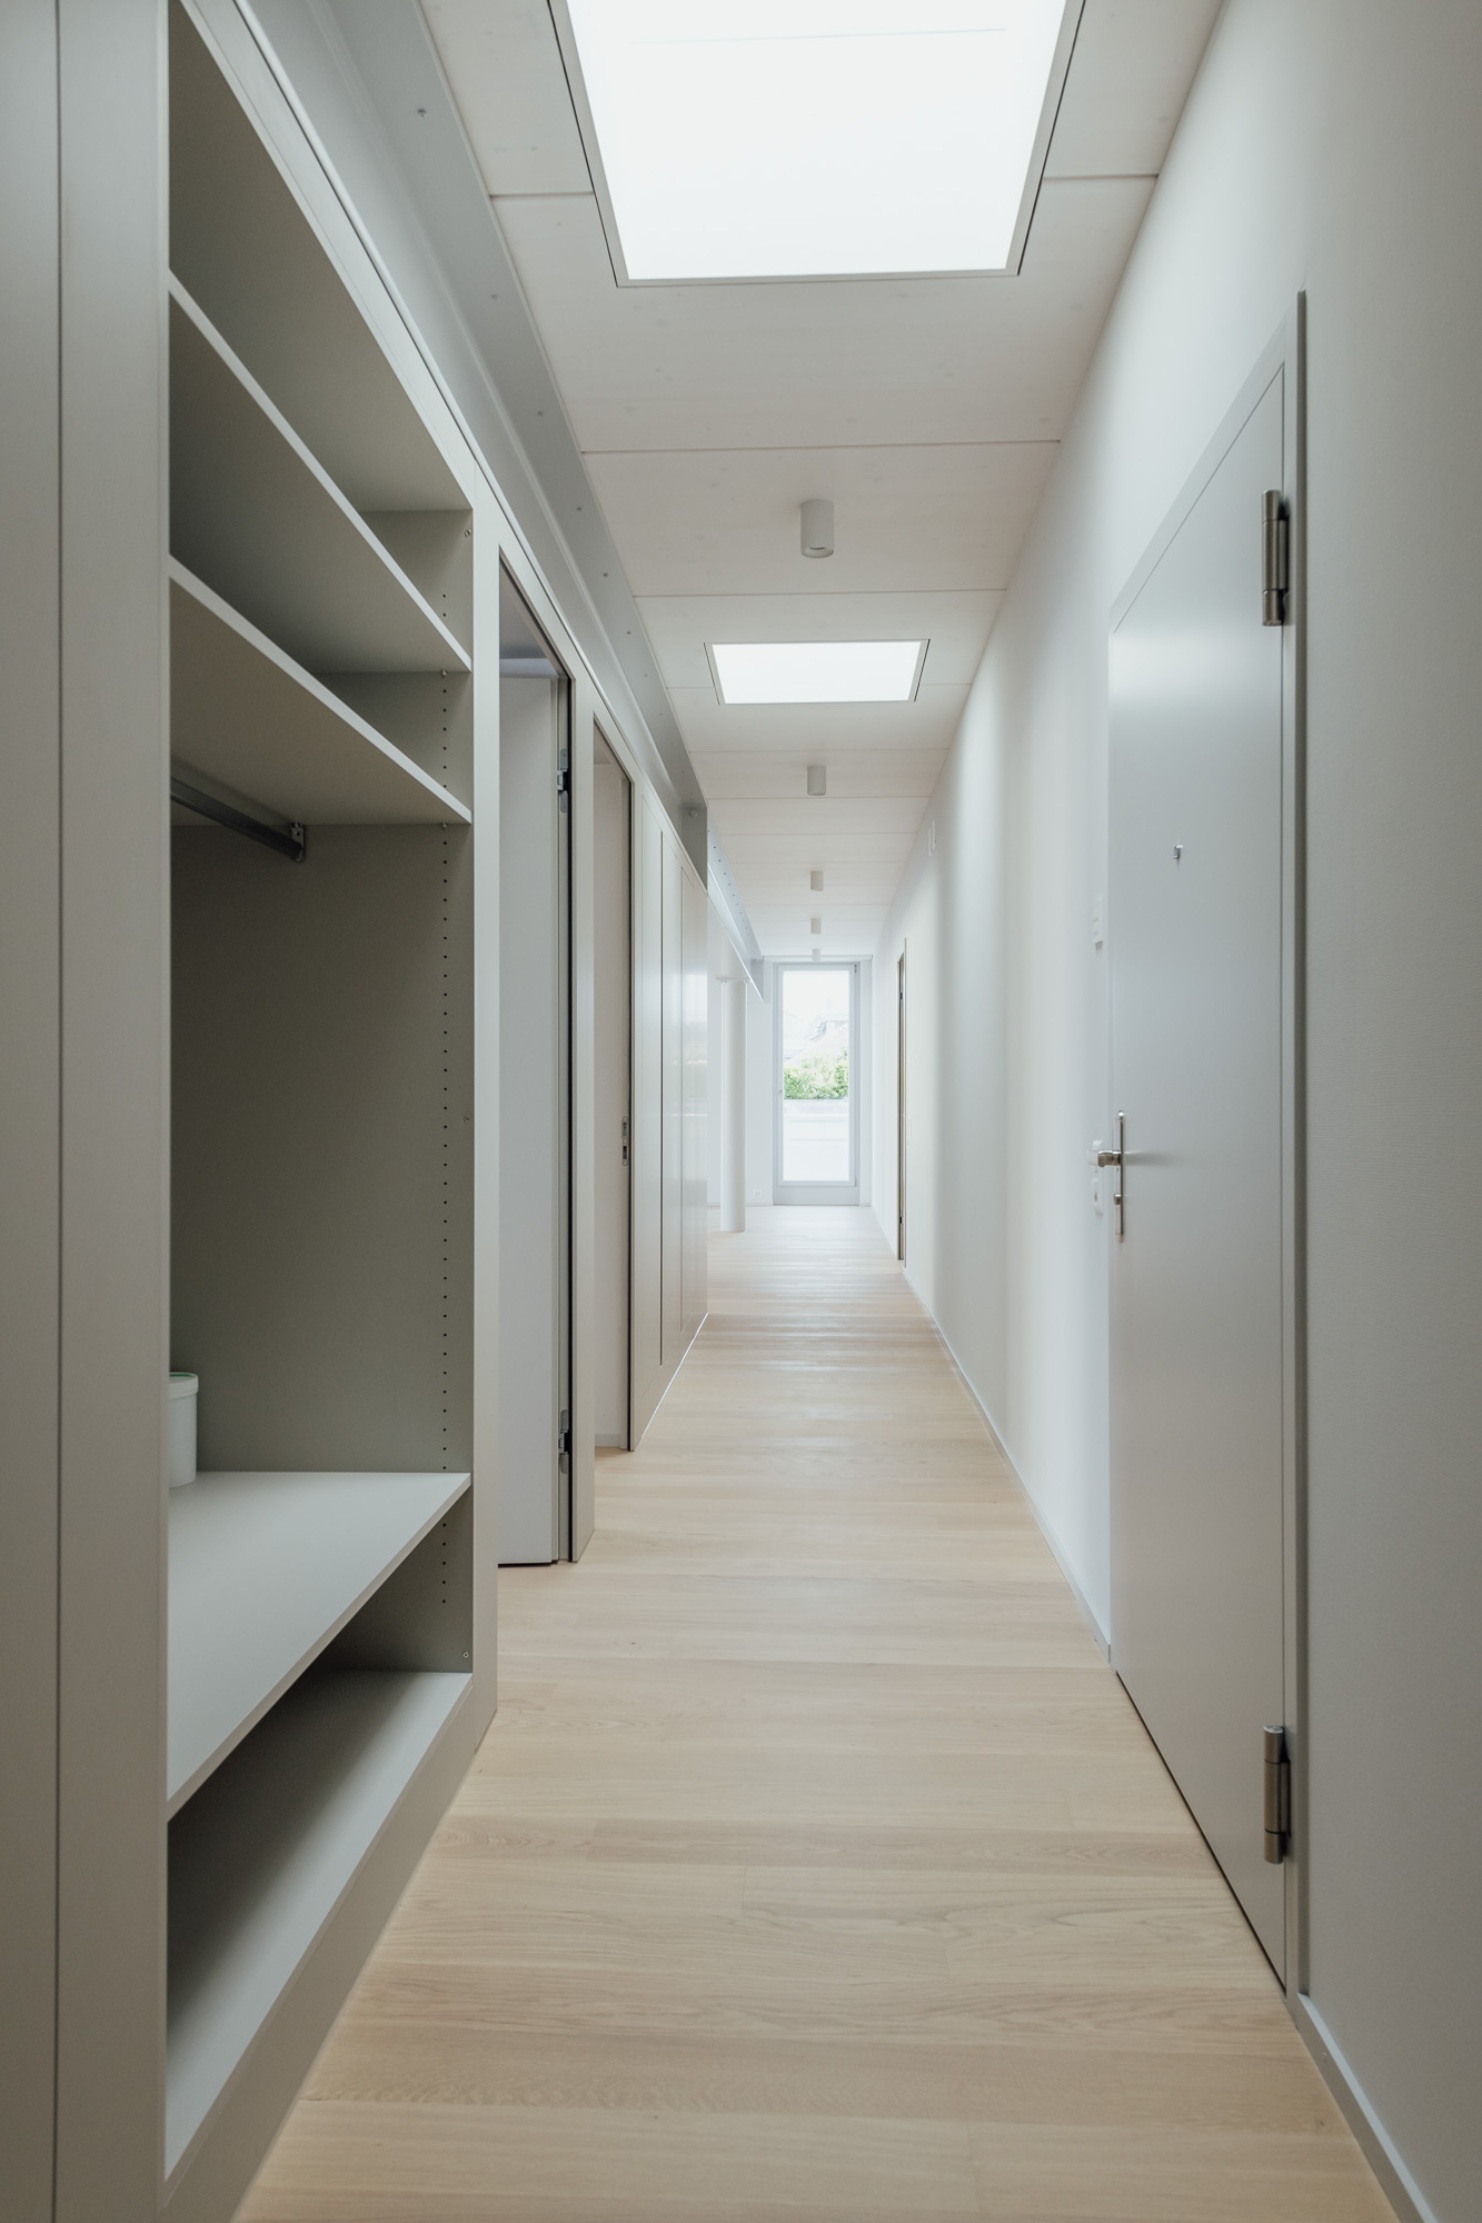 Interior view of apartment hallway with built-in cupboards